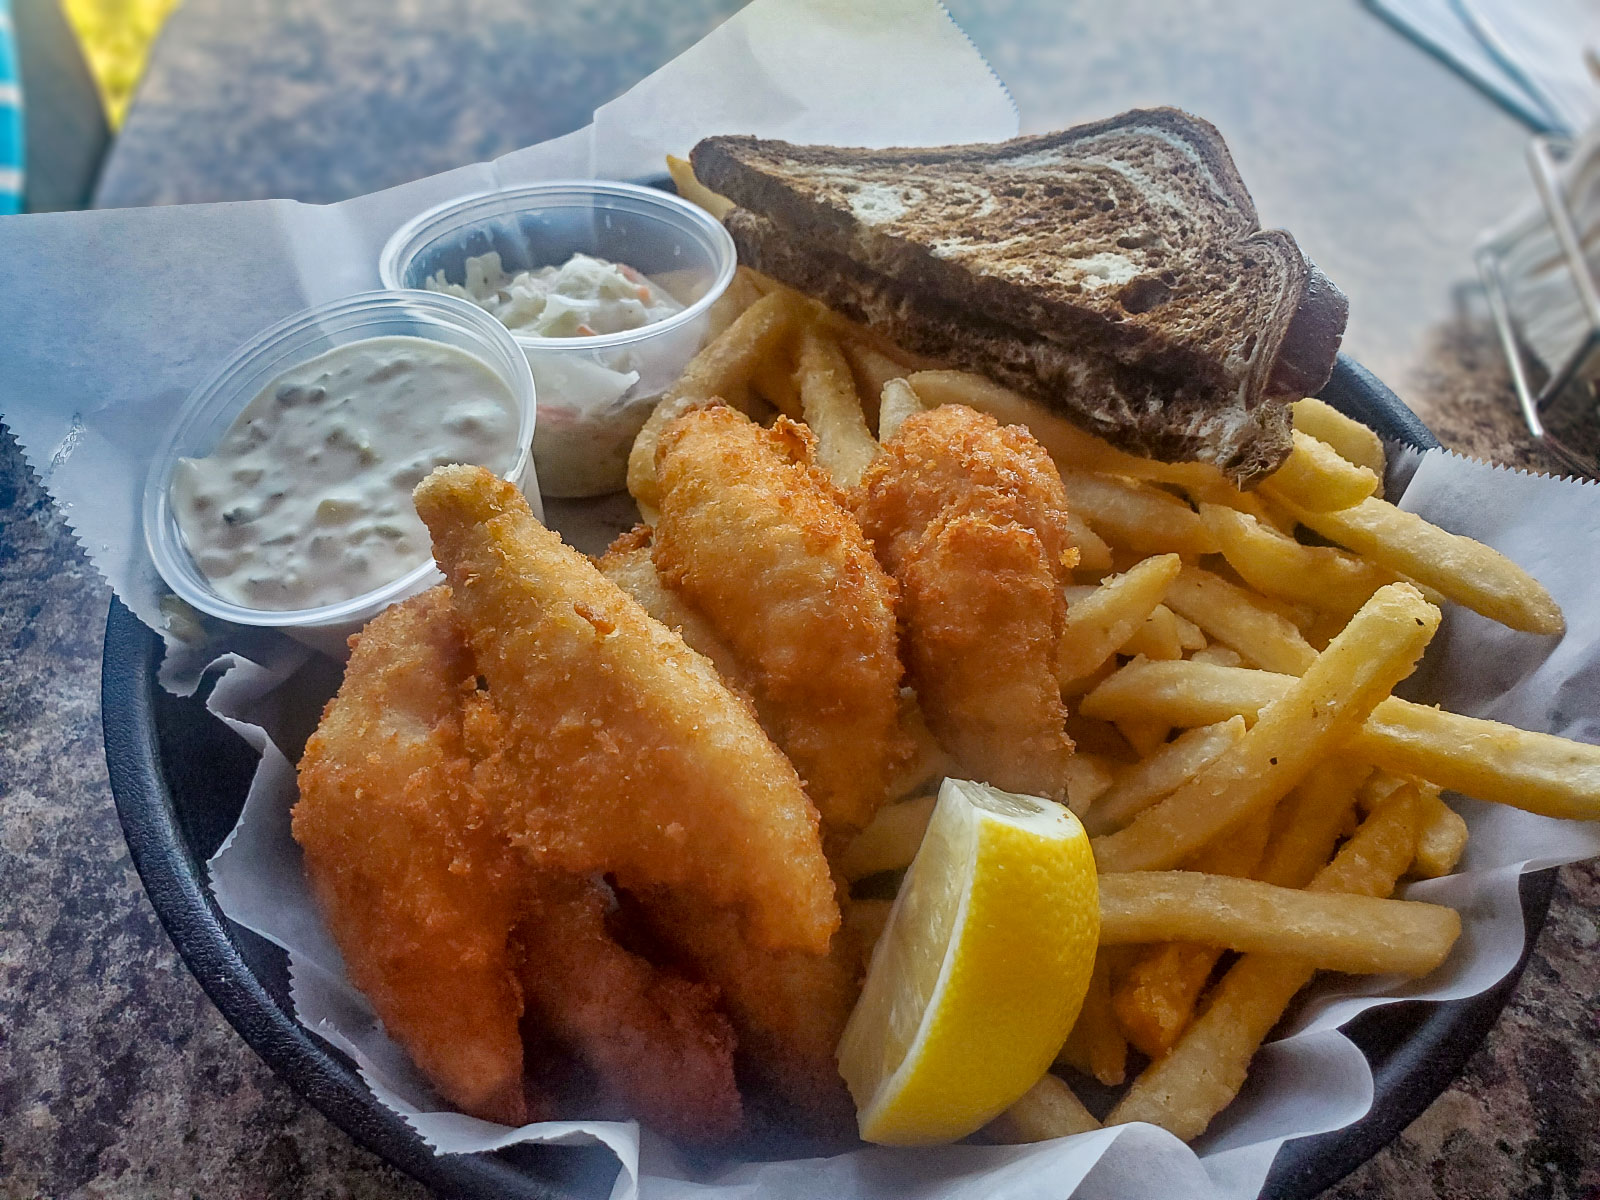 A plate of fried fish, lemon slice, french fries, white sauce, and brown and white rye bread